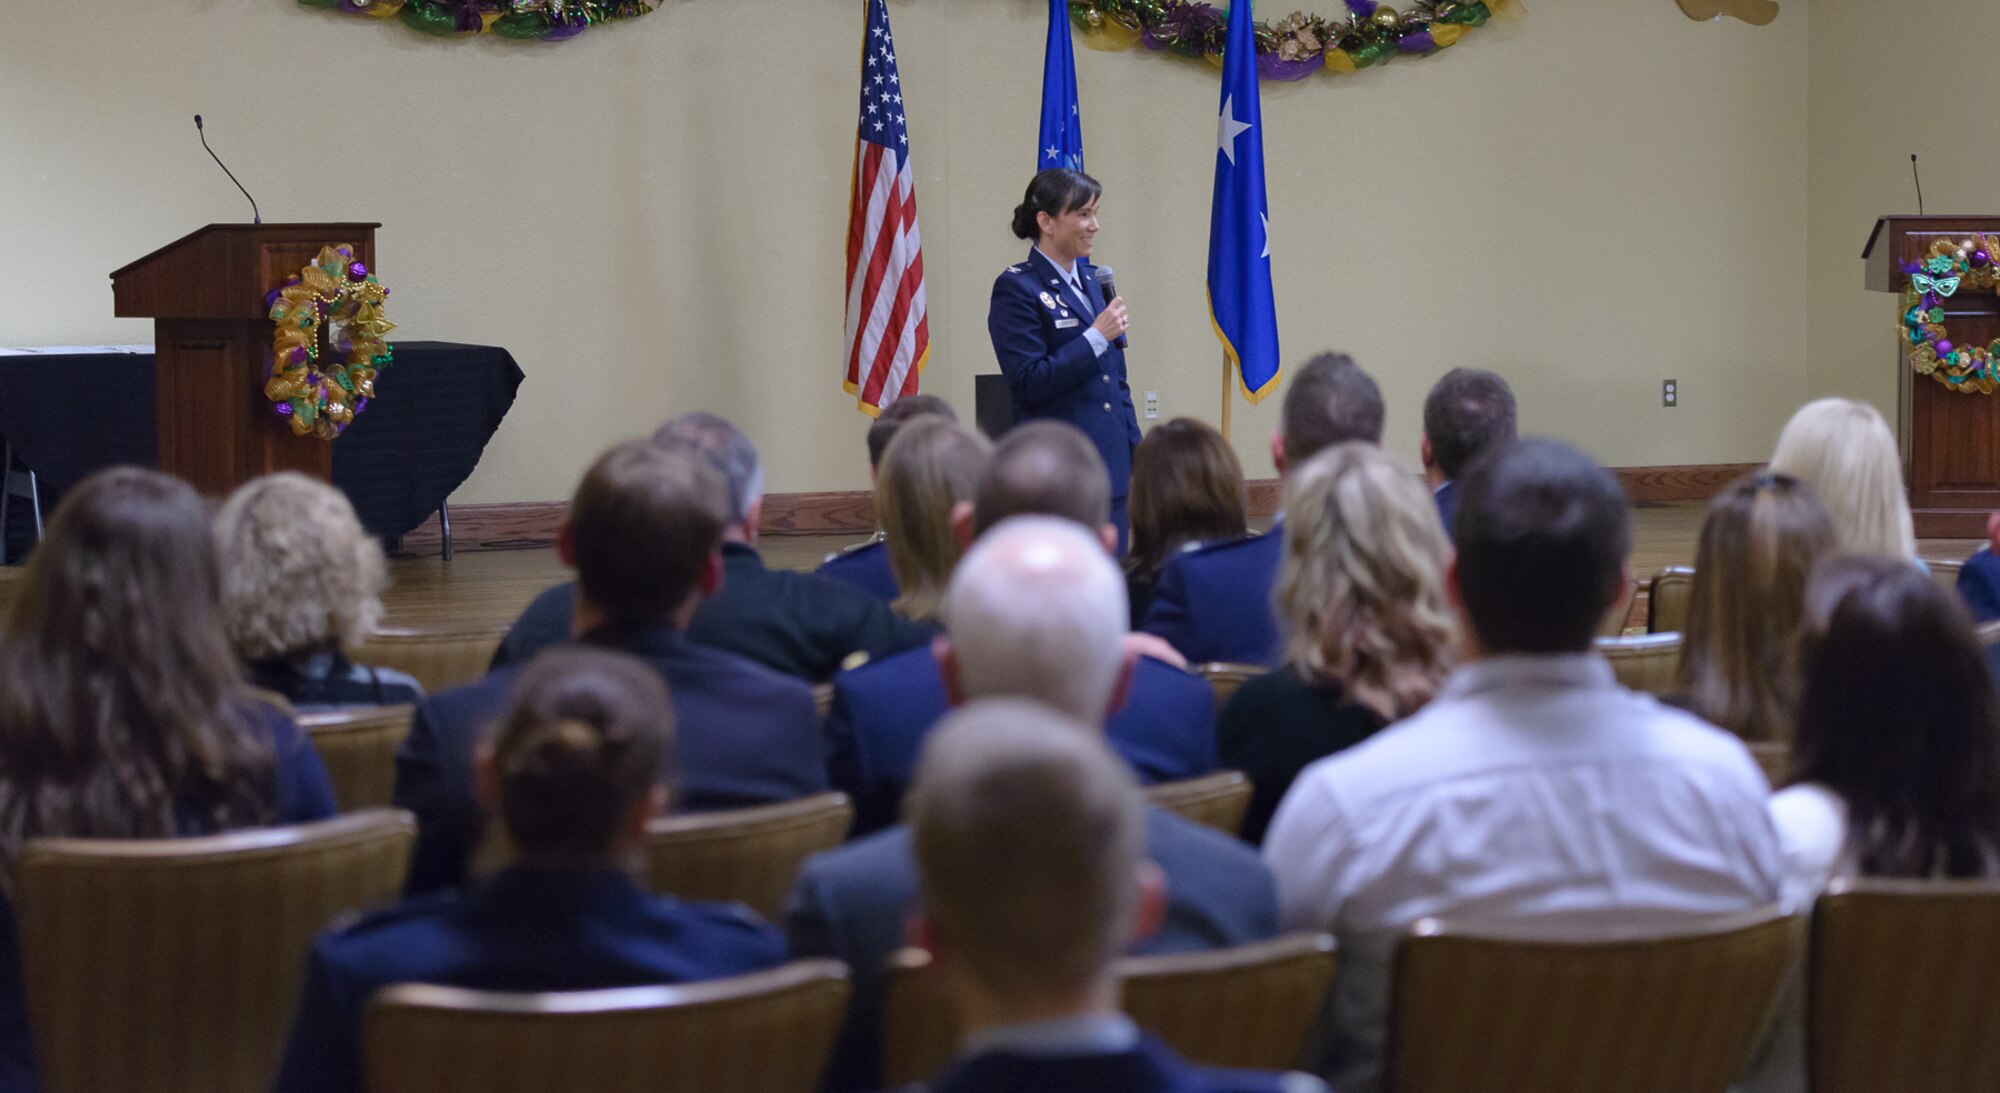 Col. Debra Lovette, 81st Training Wing commander, delivers closing remarks during the 2018 Honorary Commanders Induction Ceremony at the Bay Breeze Event Center Jan. 26, 2018, on Keesler Air Force Base, Mississippi. The event recognized the newest members of Keesler’s honorary commanders program, which is a partnership between base leadership and local civic leaders to promote strong ties between military and civilian leaders. (U.S. Air Force photo by André Askew)